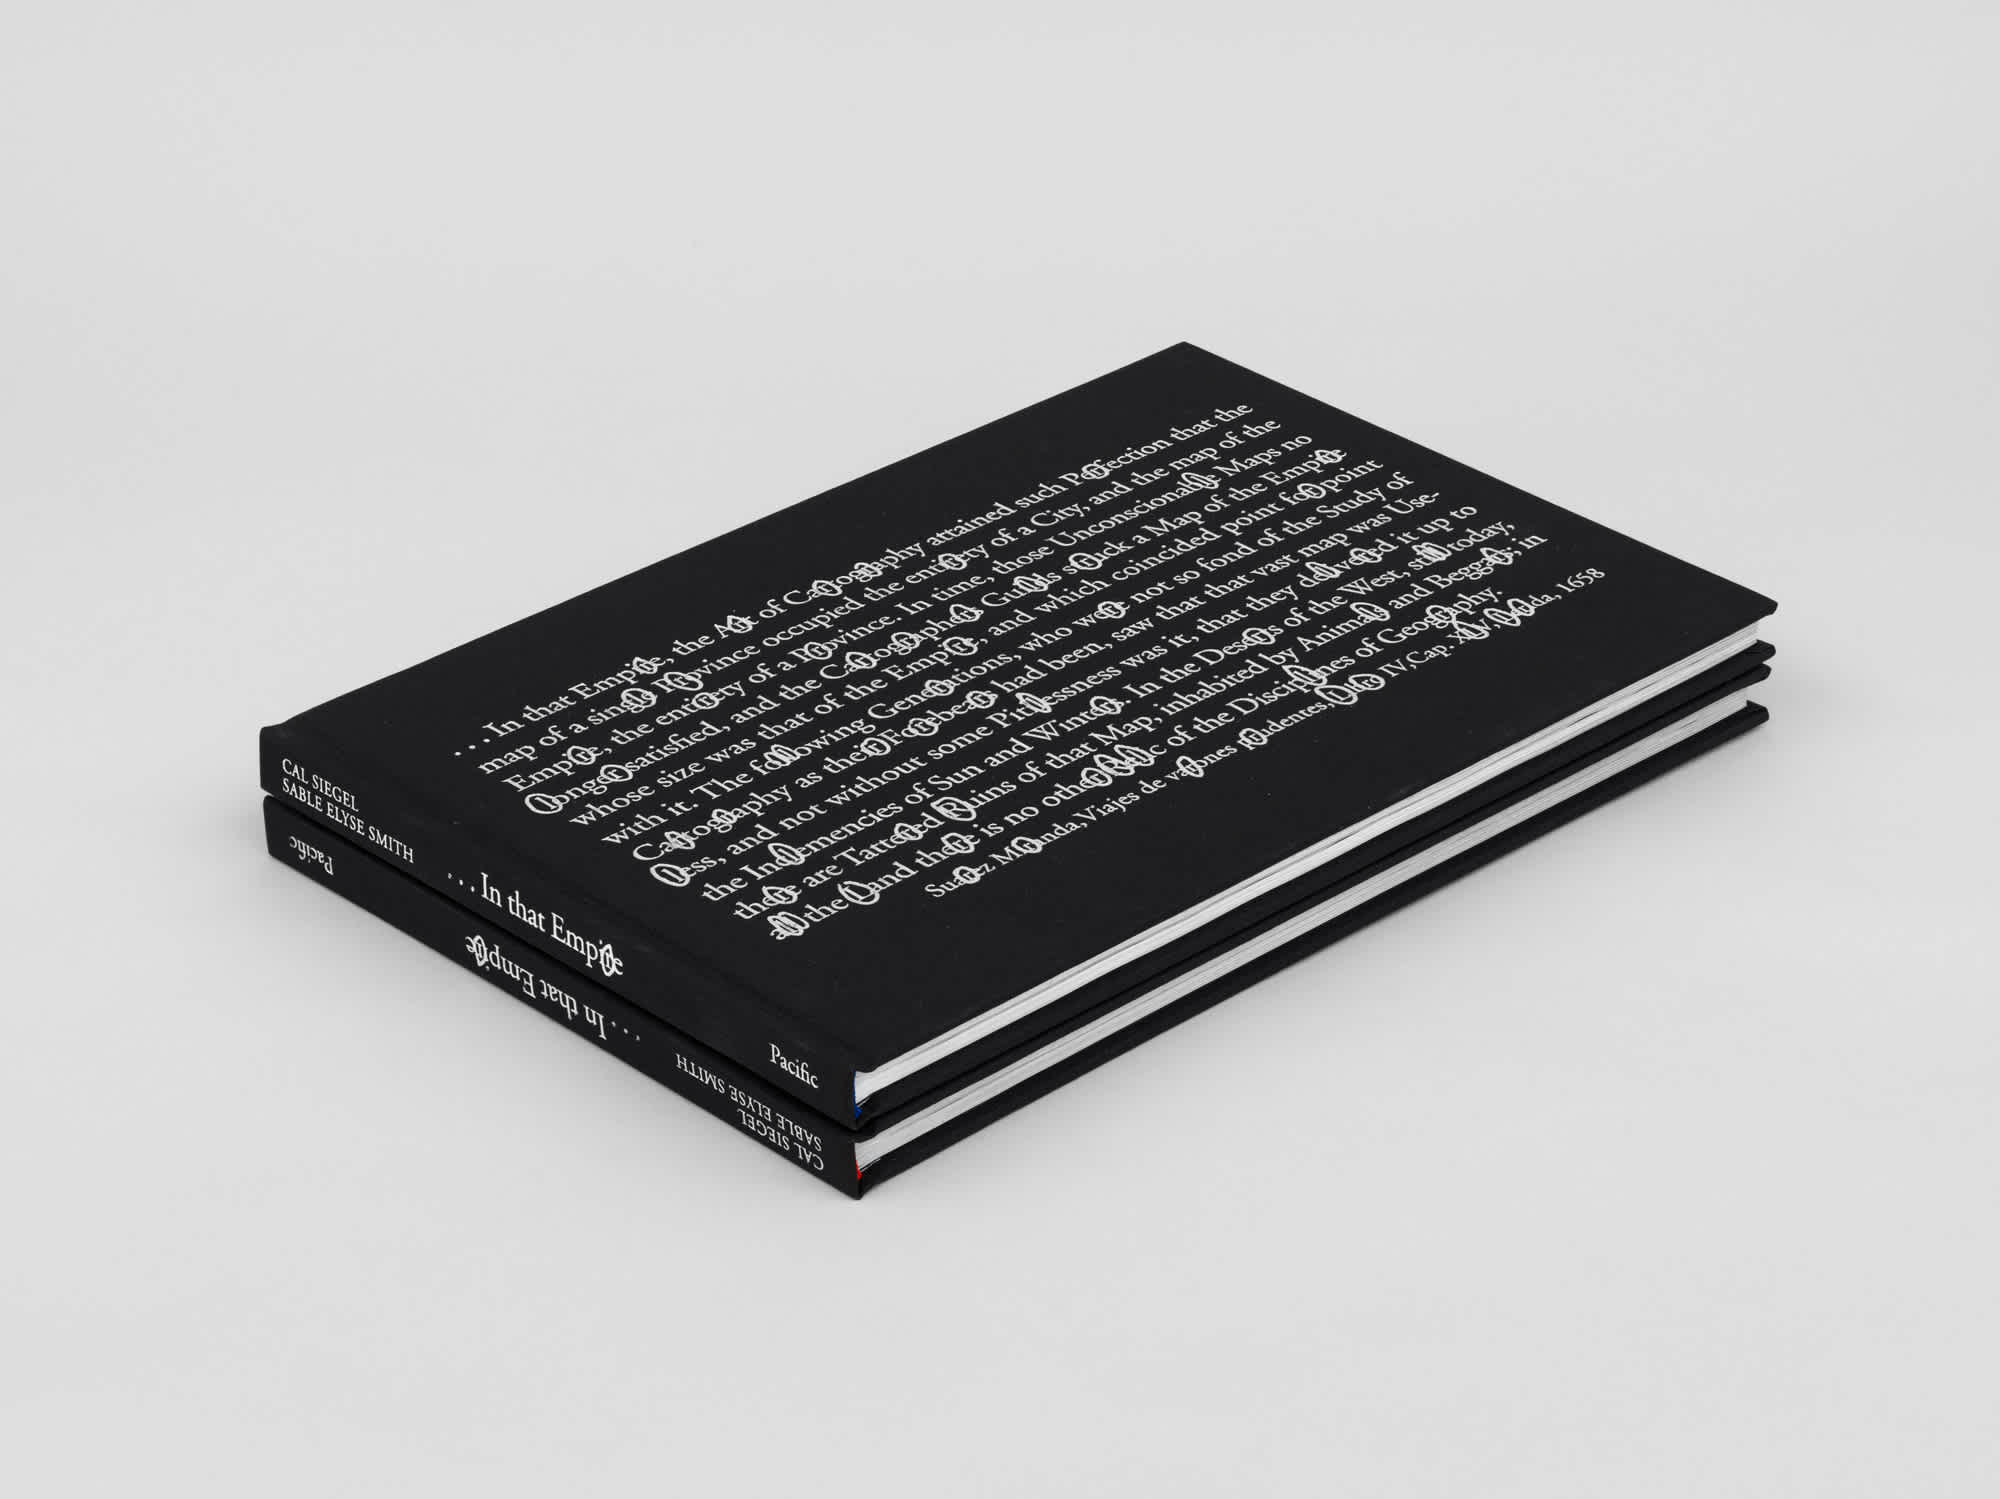 Two black rectangular books stacked on top of each other. The spines are visible.